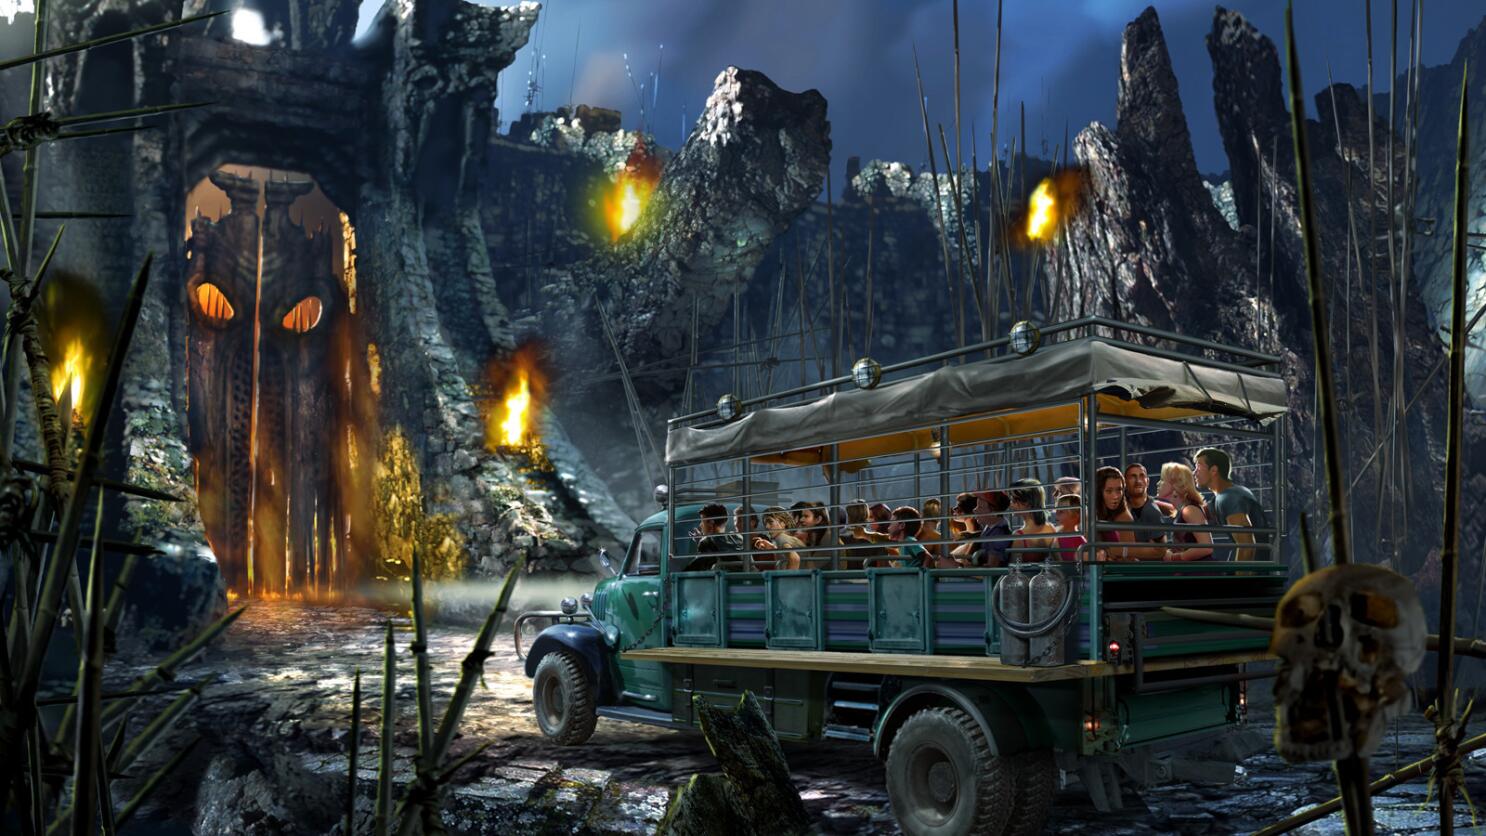 King Kong roars back to life with new ride at Universal's Islands